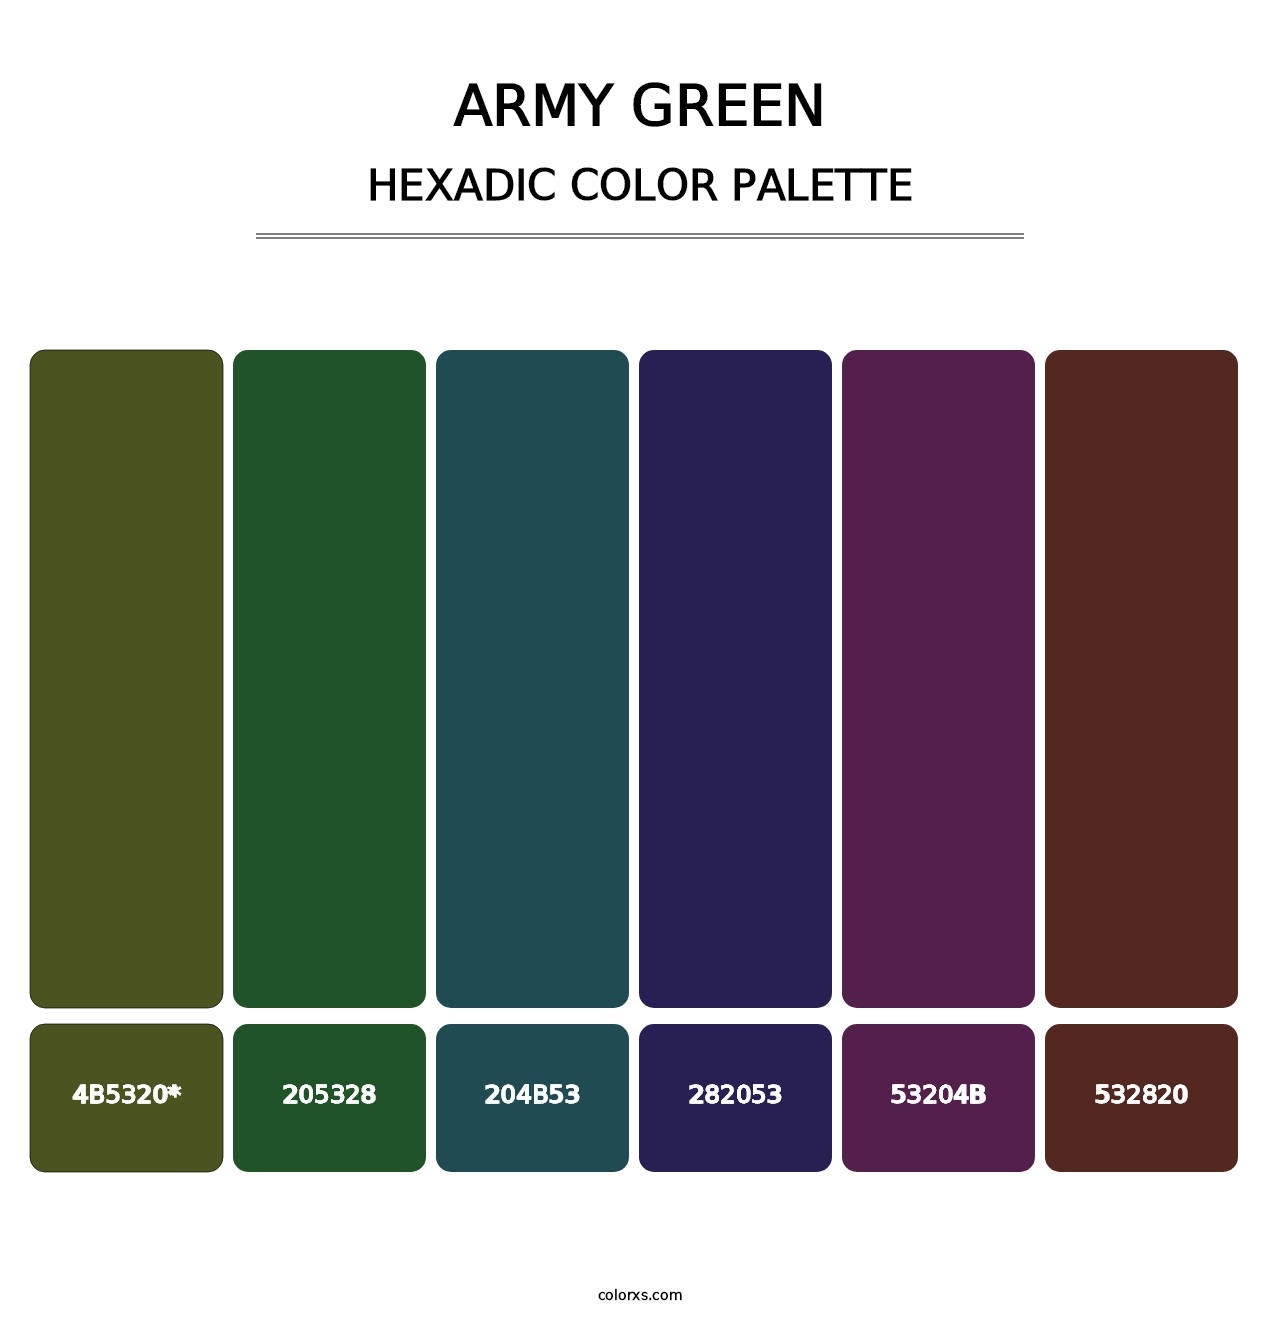 Army Green - Hexadic Color Palette